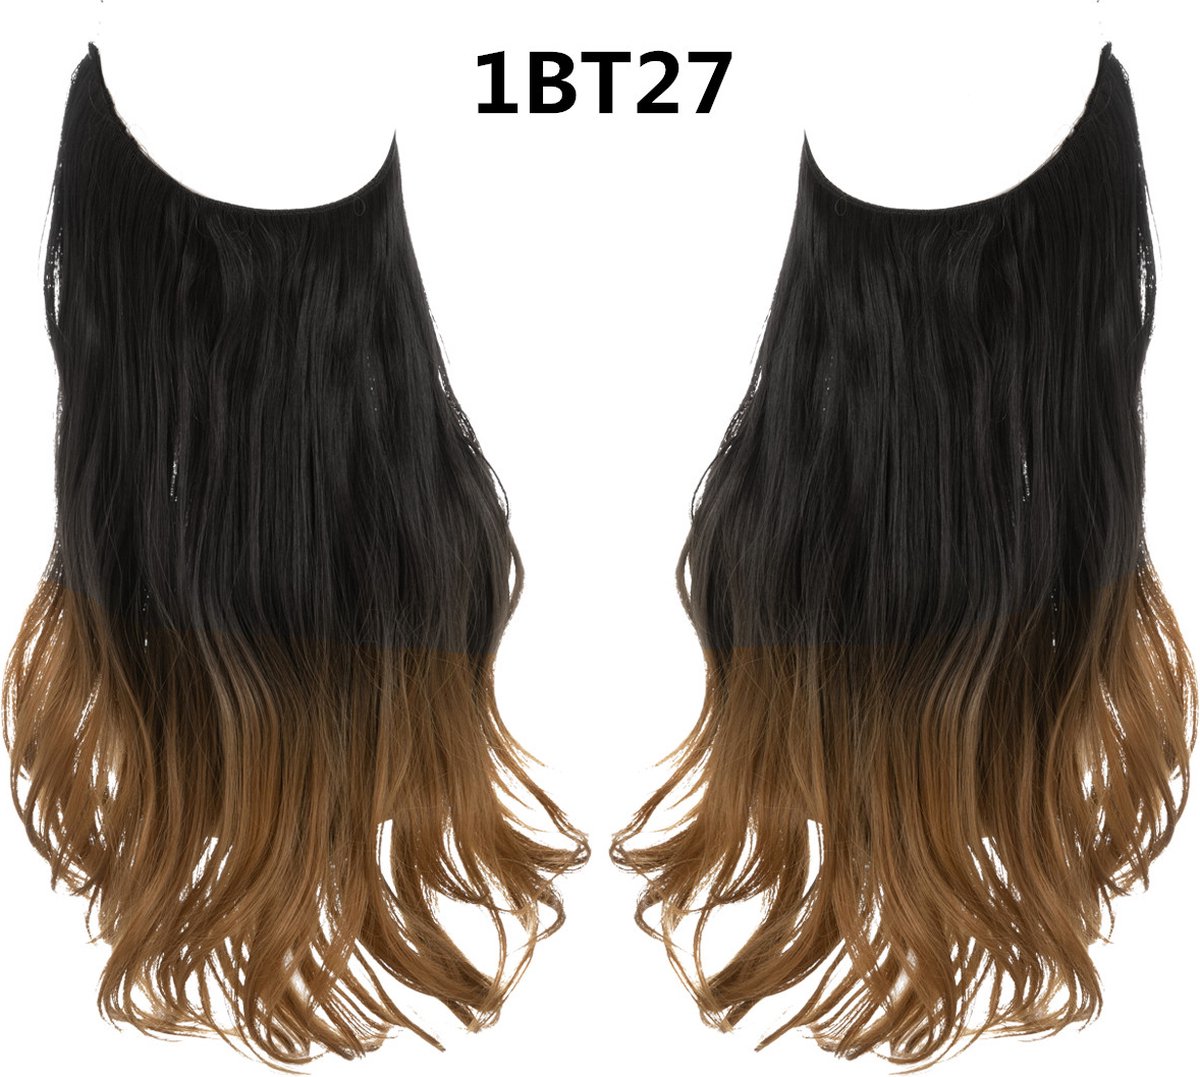 Premium Fiber Synthetic Clip in Extensions Single / Wire Extensions - BodyWave - 45cm- (#1BT27) Jett Black Ombre Middle Brown M01